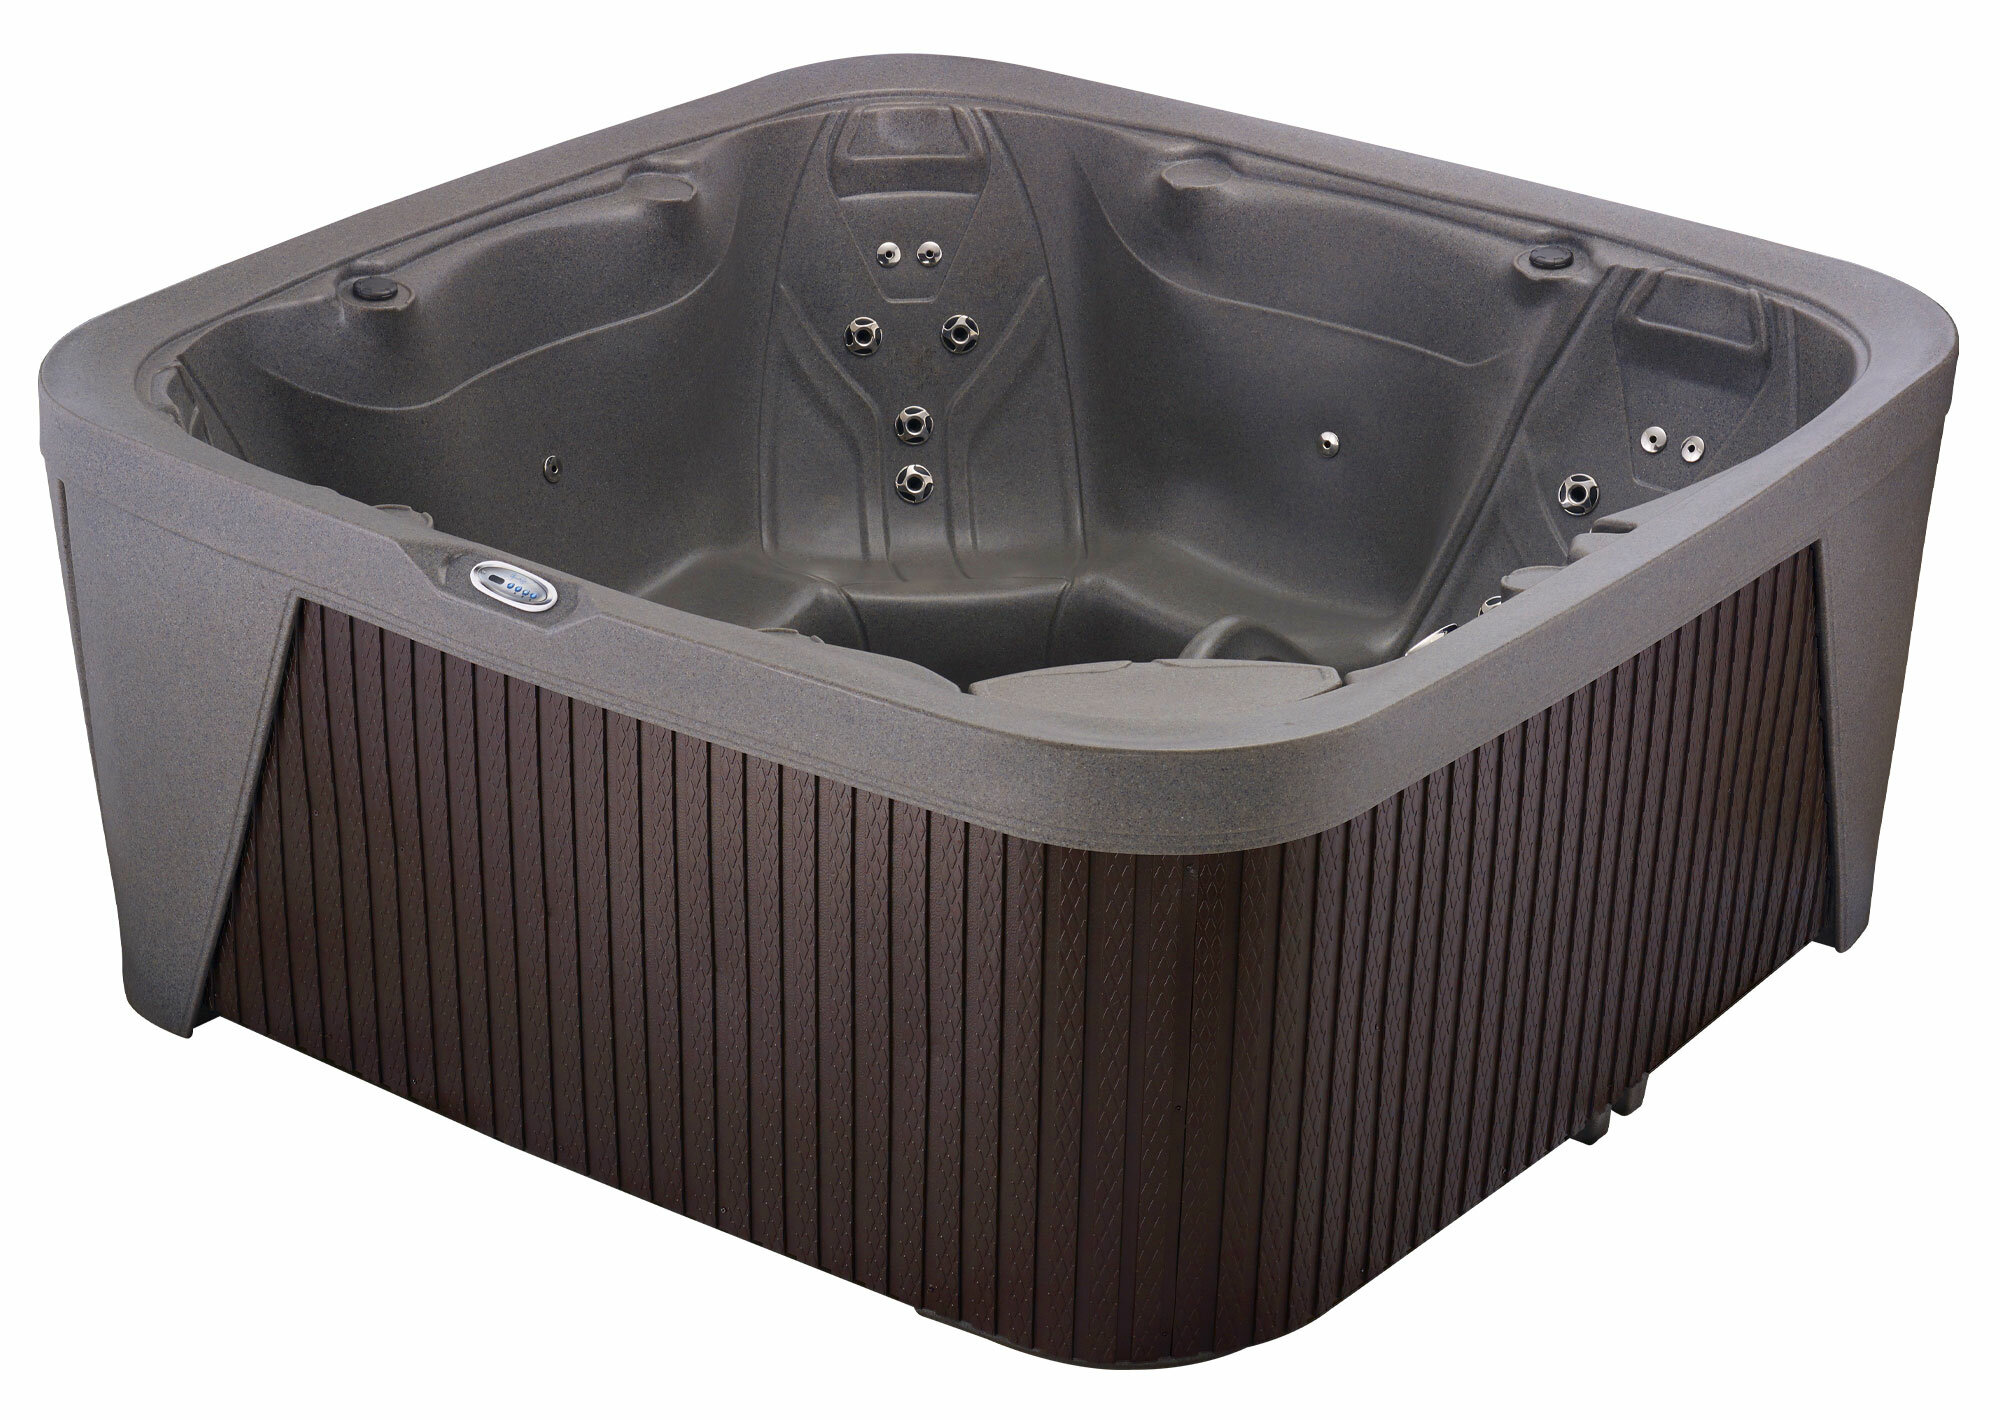 2 person hot tub plug and play